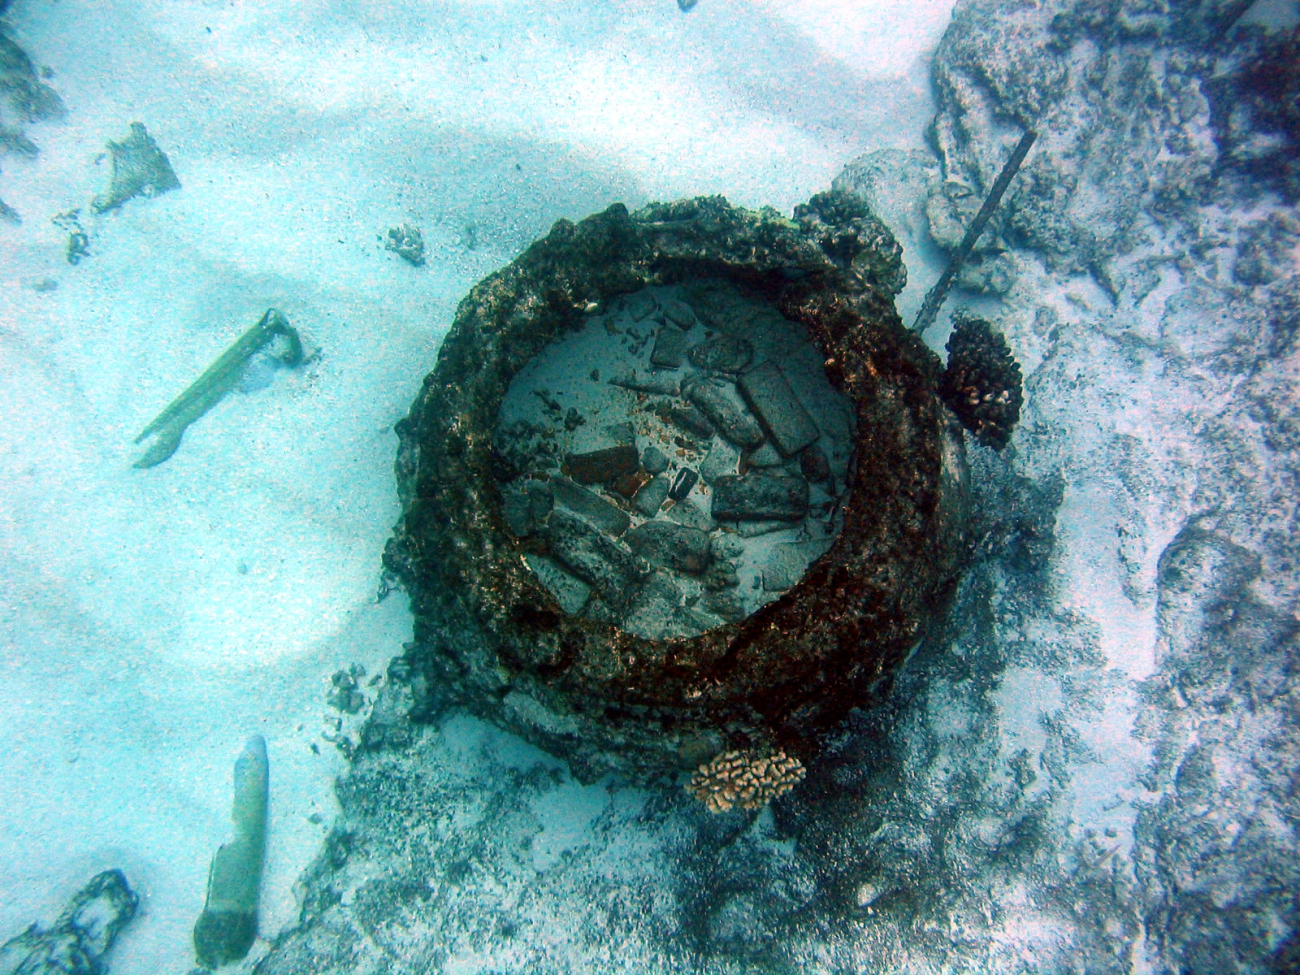 Looking down into a blubber rendering pots from the wreck of an early Nineteenth Century whaling vessel on Pearl and Hermes Reef